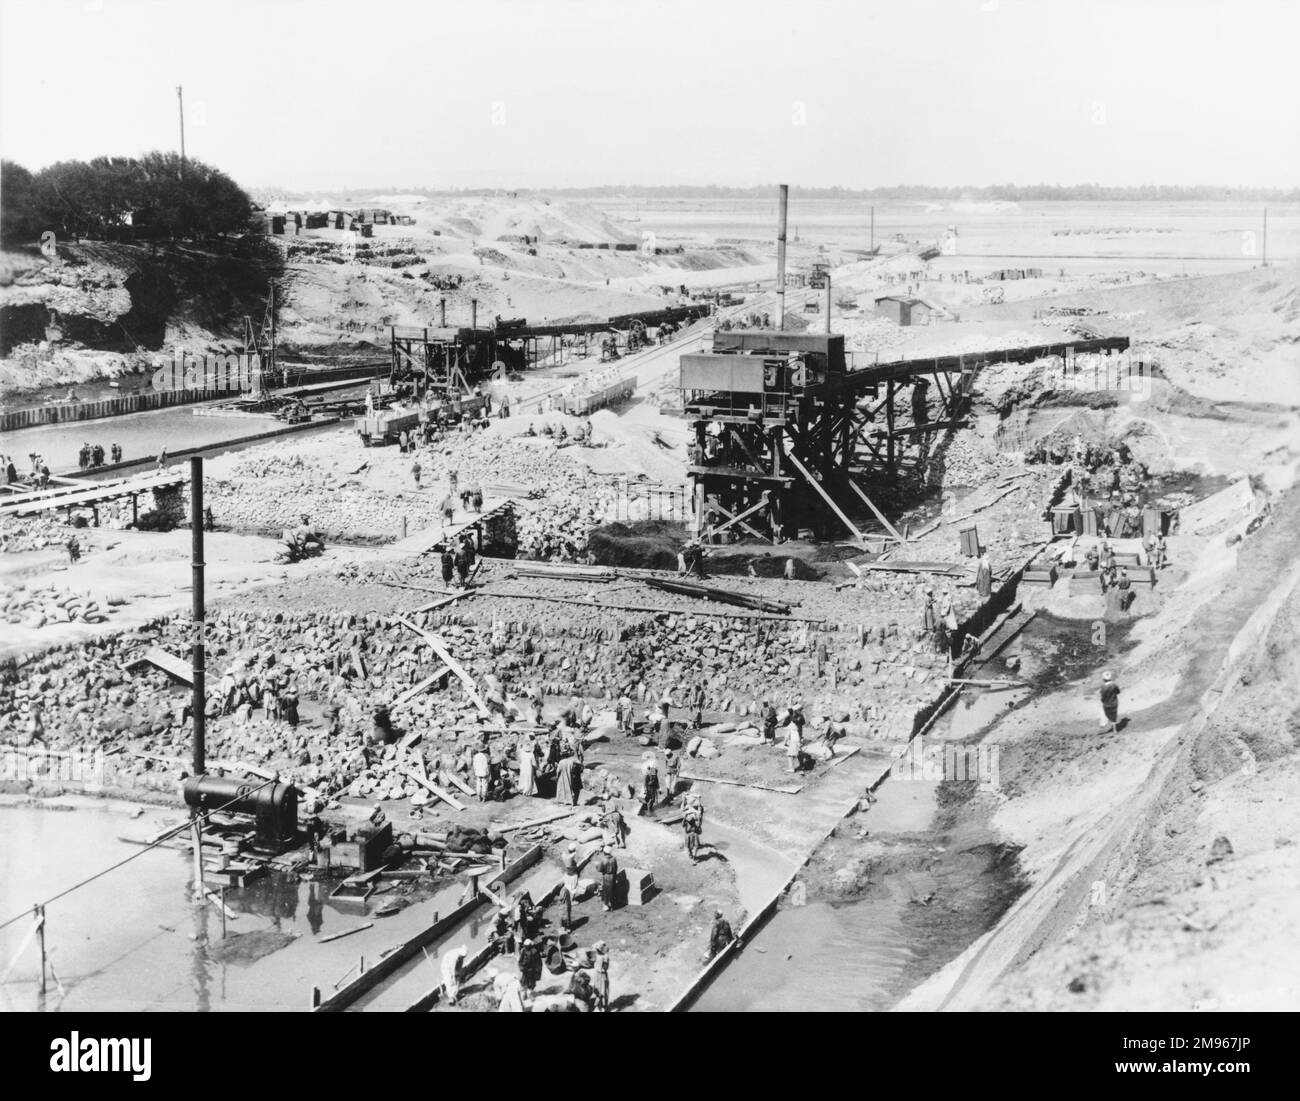 Constructing the Assiut of Asyut Barrage on the River Nile in Egypt, about 350 miles downstream of the Aswan Dam. The dam was built in order to divert the waters of the Nile into Egypt's largest irrigation canal, the Ibrahimiya Canal. The photograph shows the foundations of the Ibrahimiya canal head regulator Stock Photo